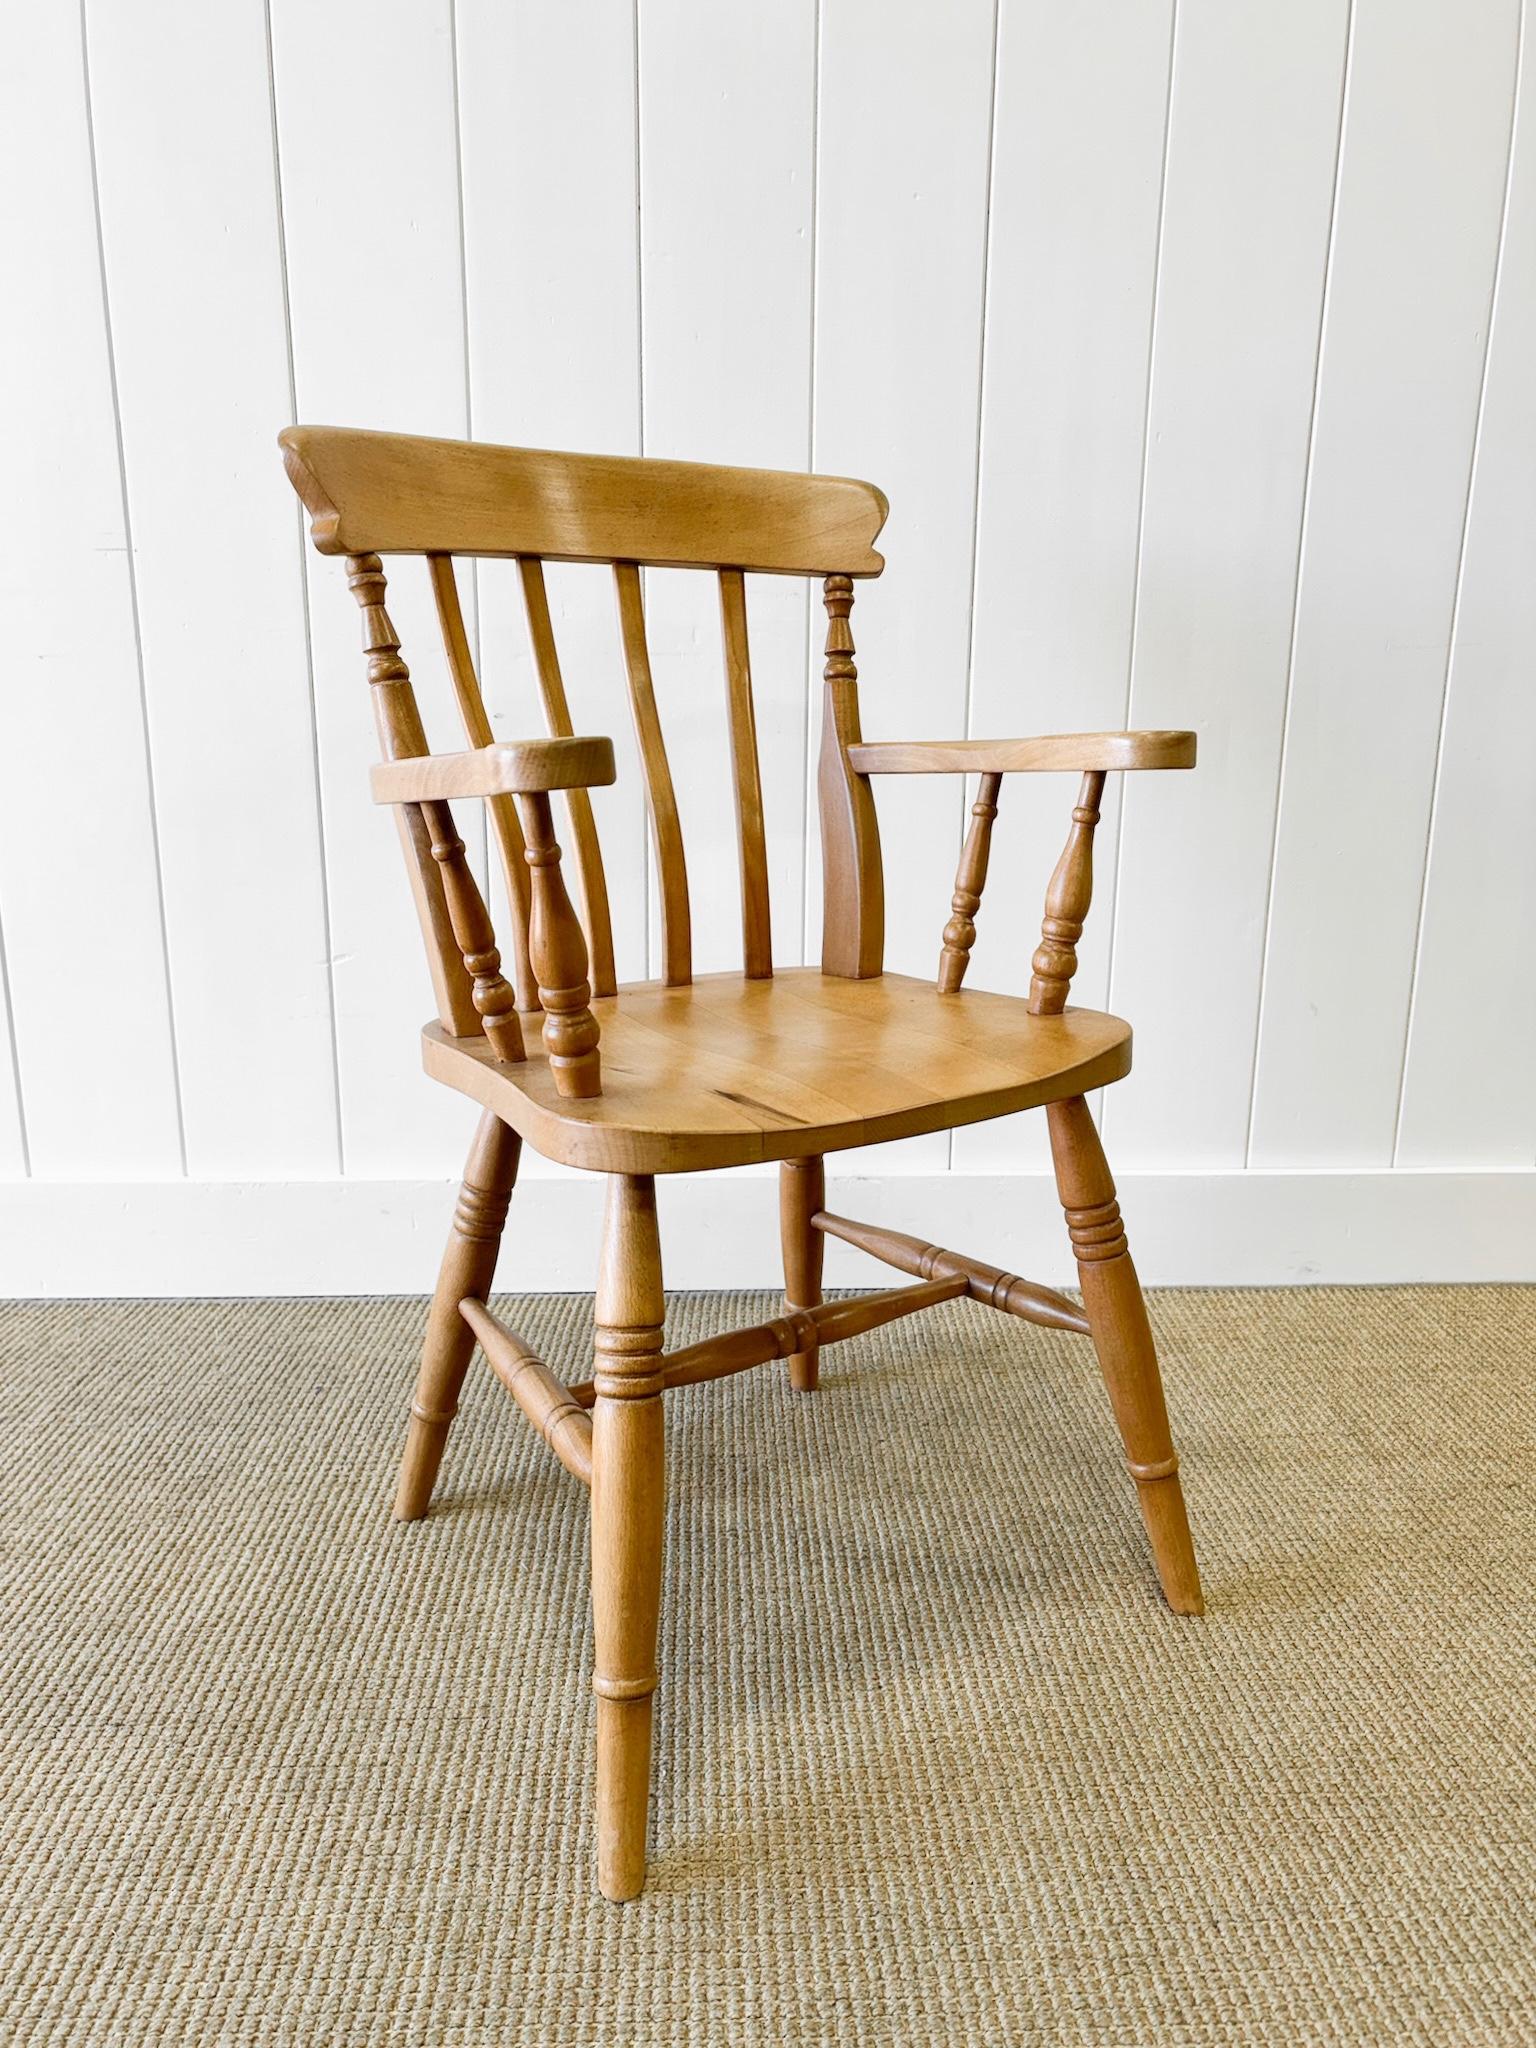 A very useful English arm chair. Light pine finish.  Sturdy enough for a desk chair, but should not be rocked-back on!

Condition: scratches, dents, marks, some spots of the finish are worn, stains -  historical repairs - beautiful